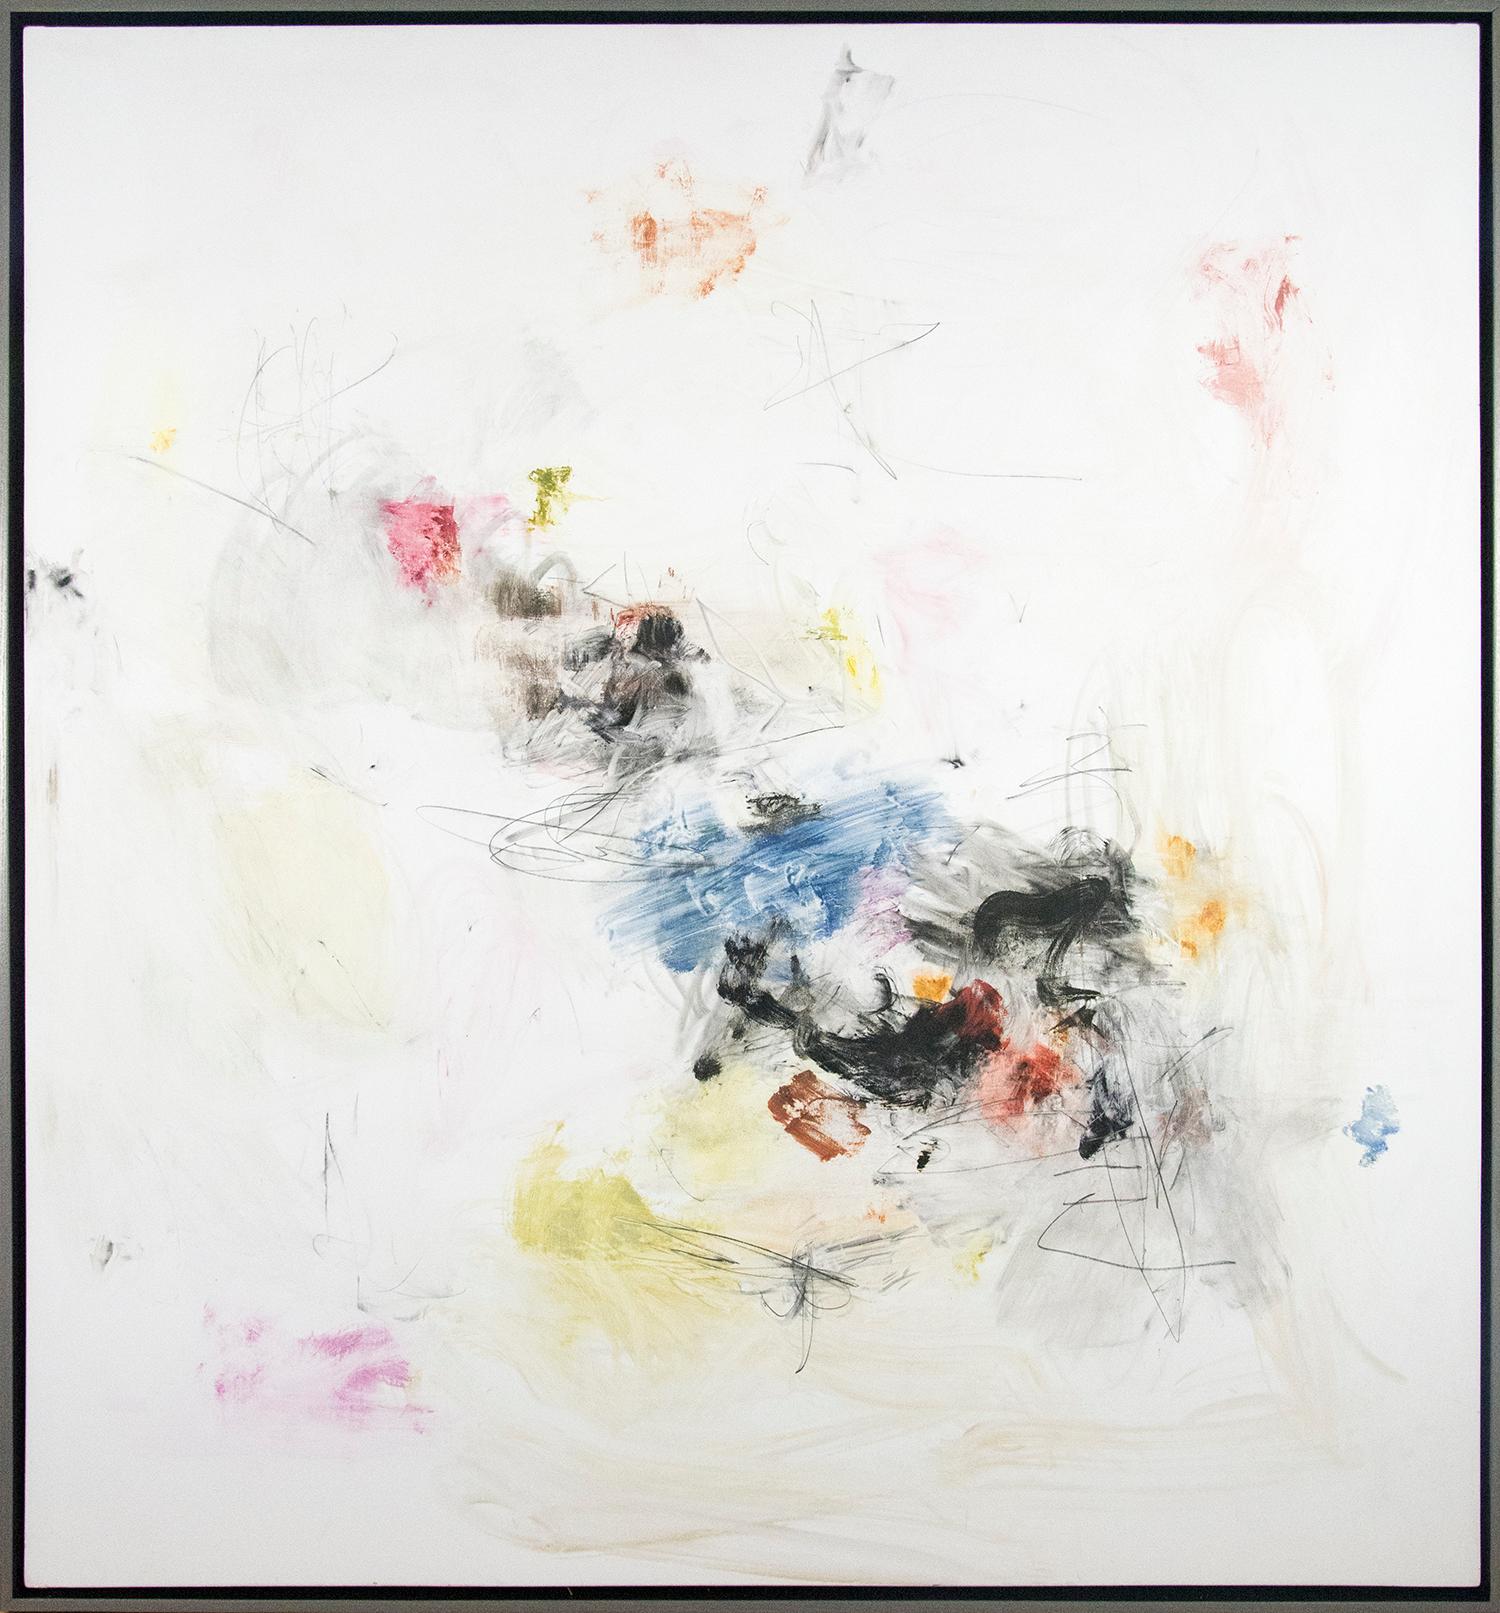 Ouvert No 78 - large, soft, white, blue, yellow, gestural abstract oil on canvas - Painting by Scott Pattinson